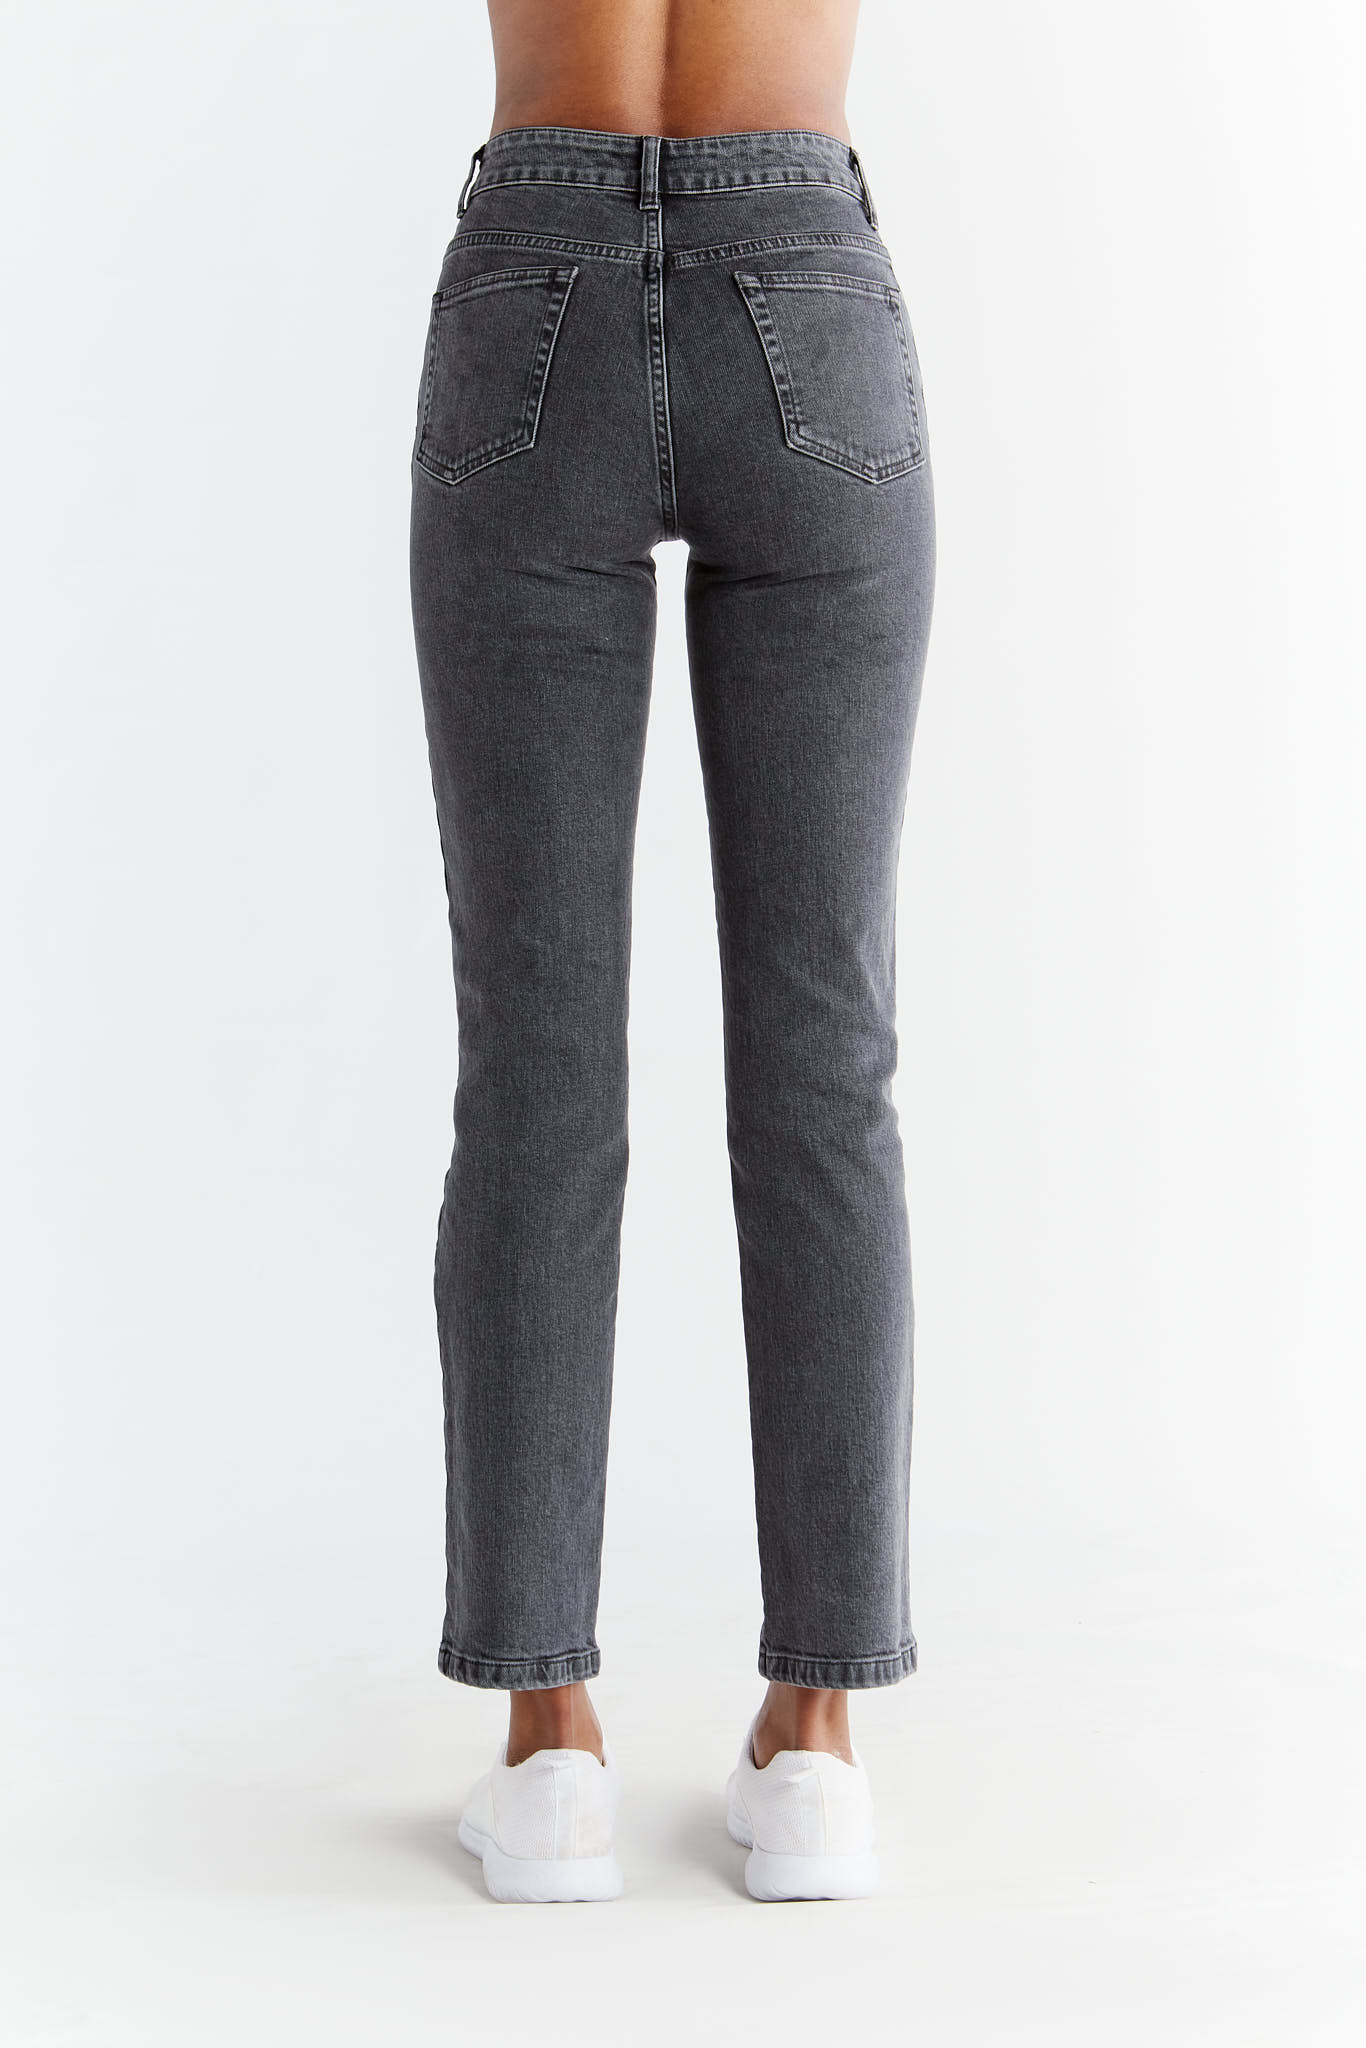 Jeans Women's Straight Fit Ash Gray